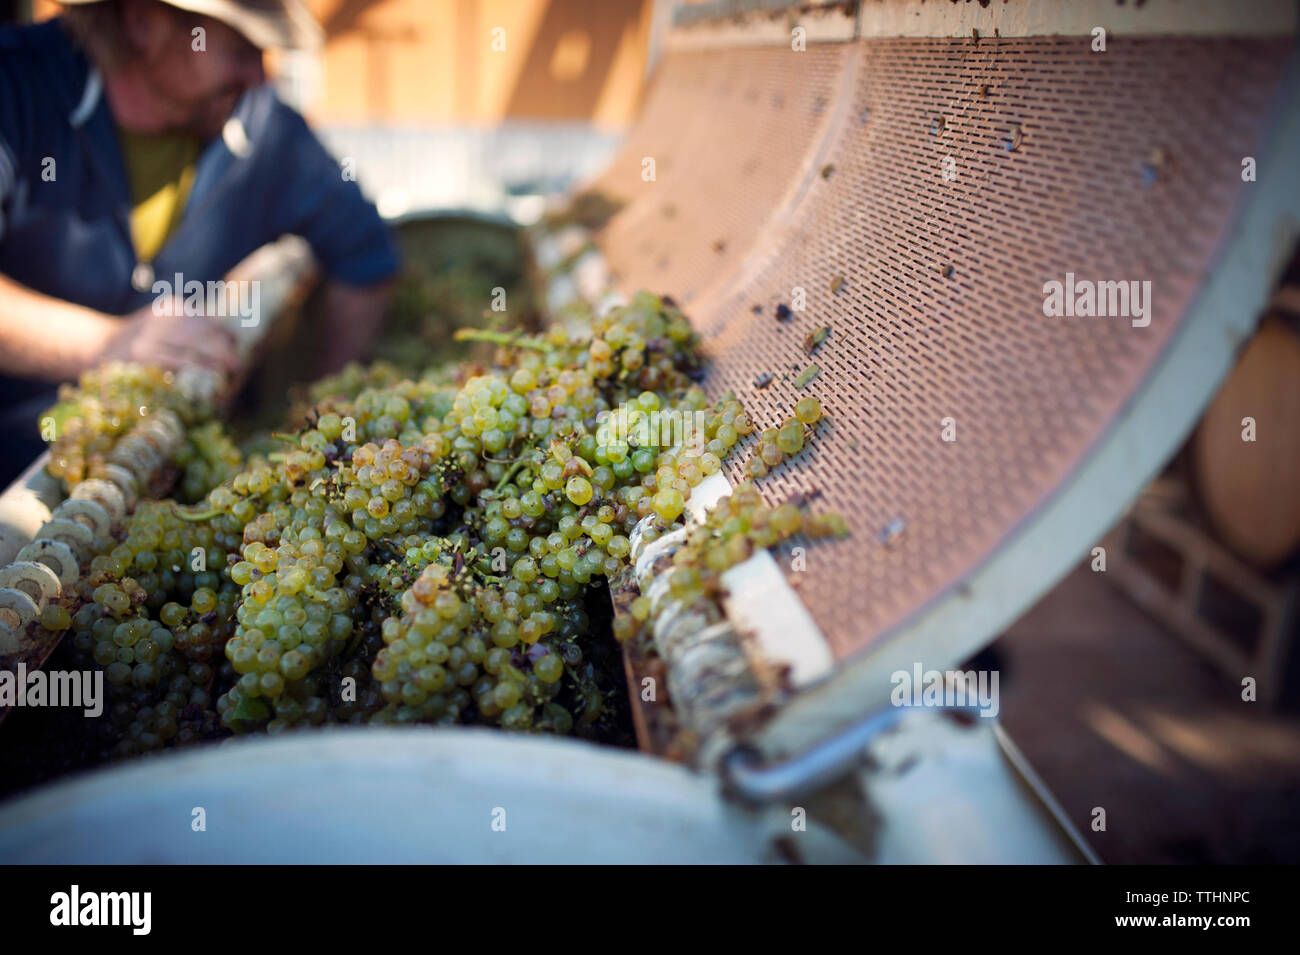 Farmer loading machinery with grapes Stock Photo